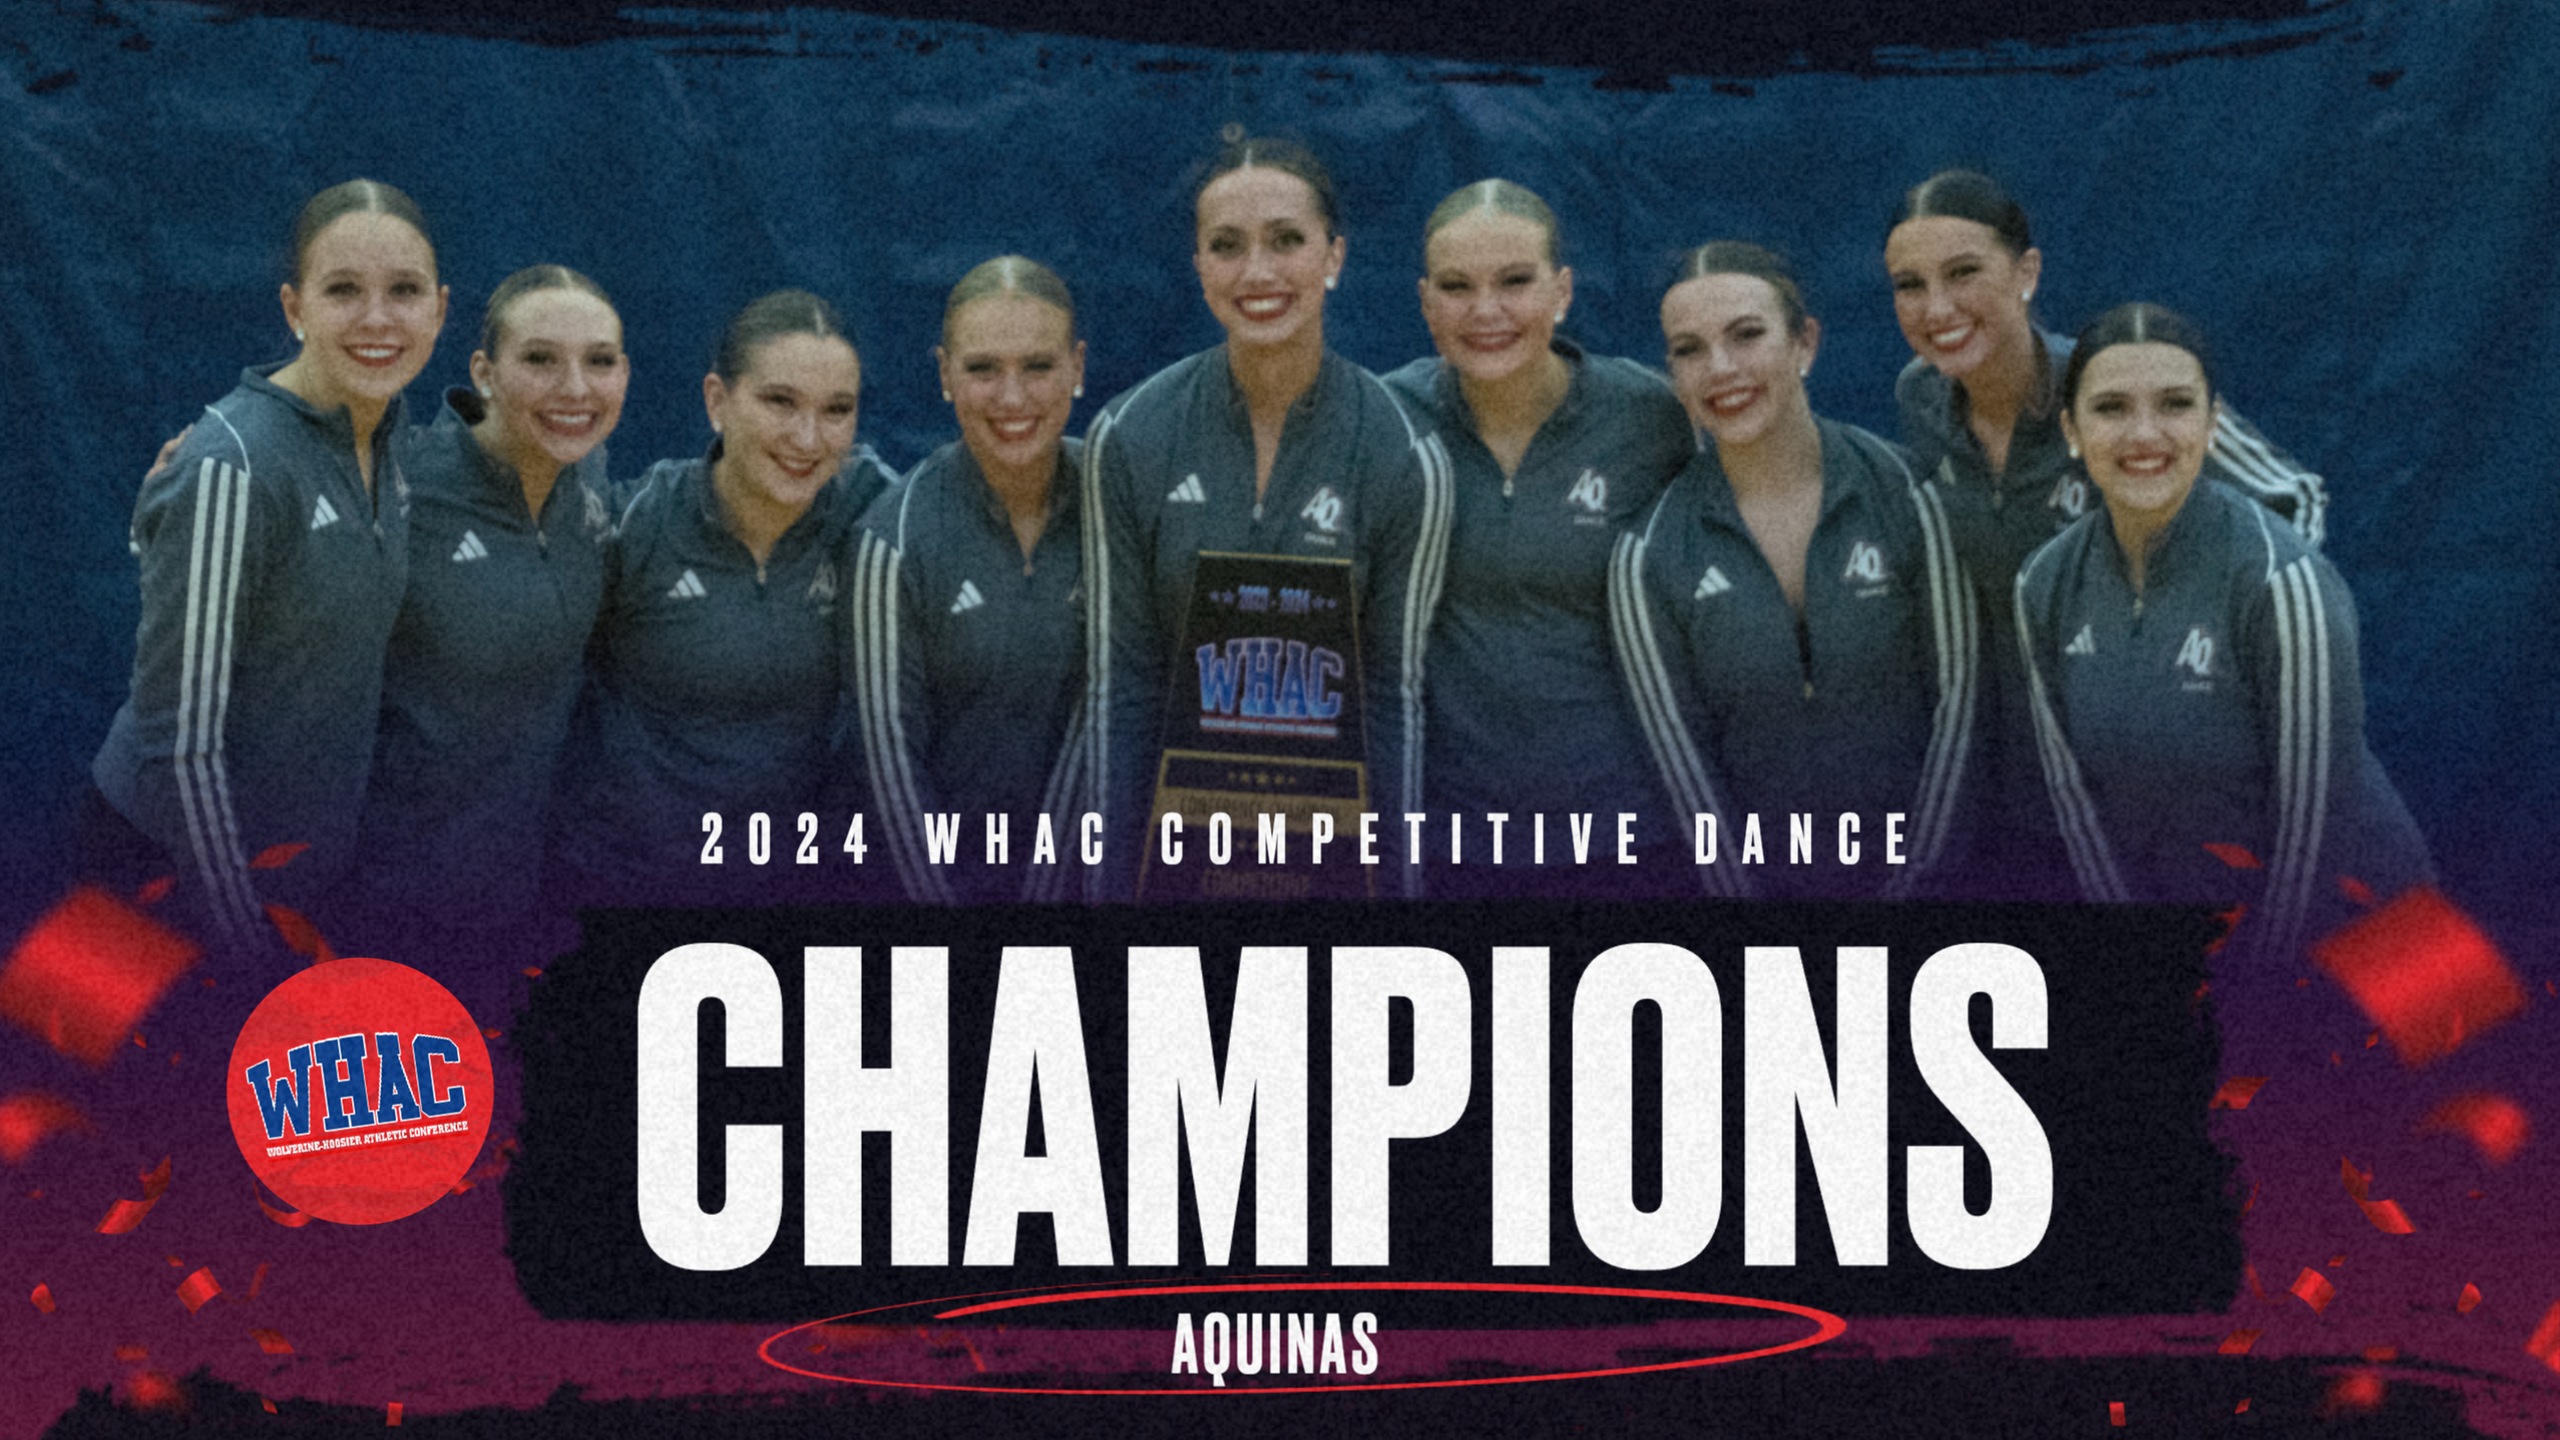 Aquinas Wins Fifth-Straight WHAC Competitive Dance Title